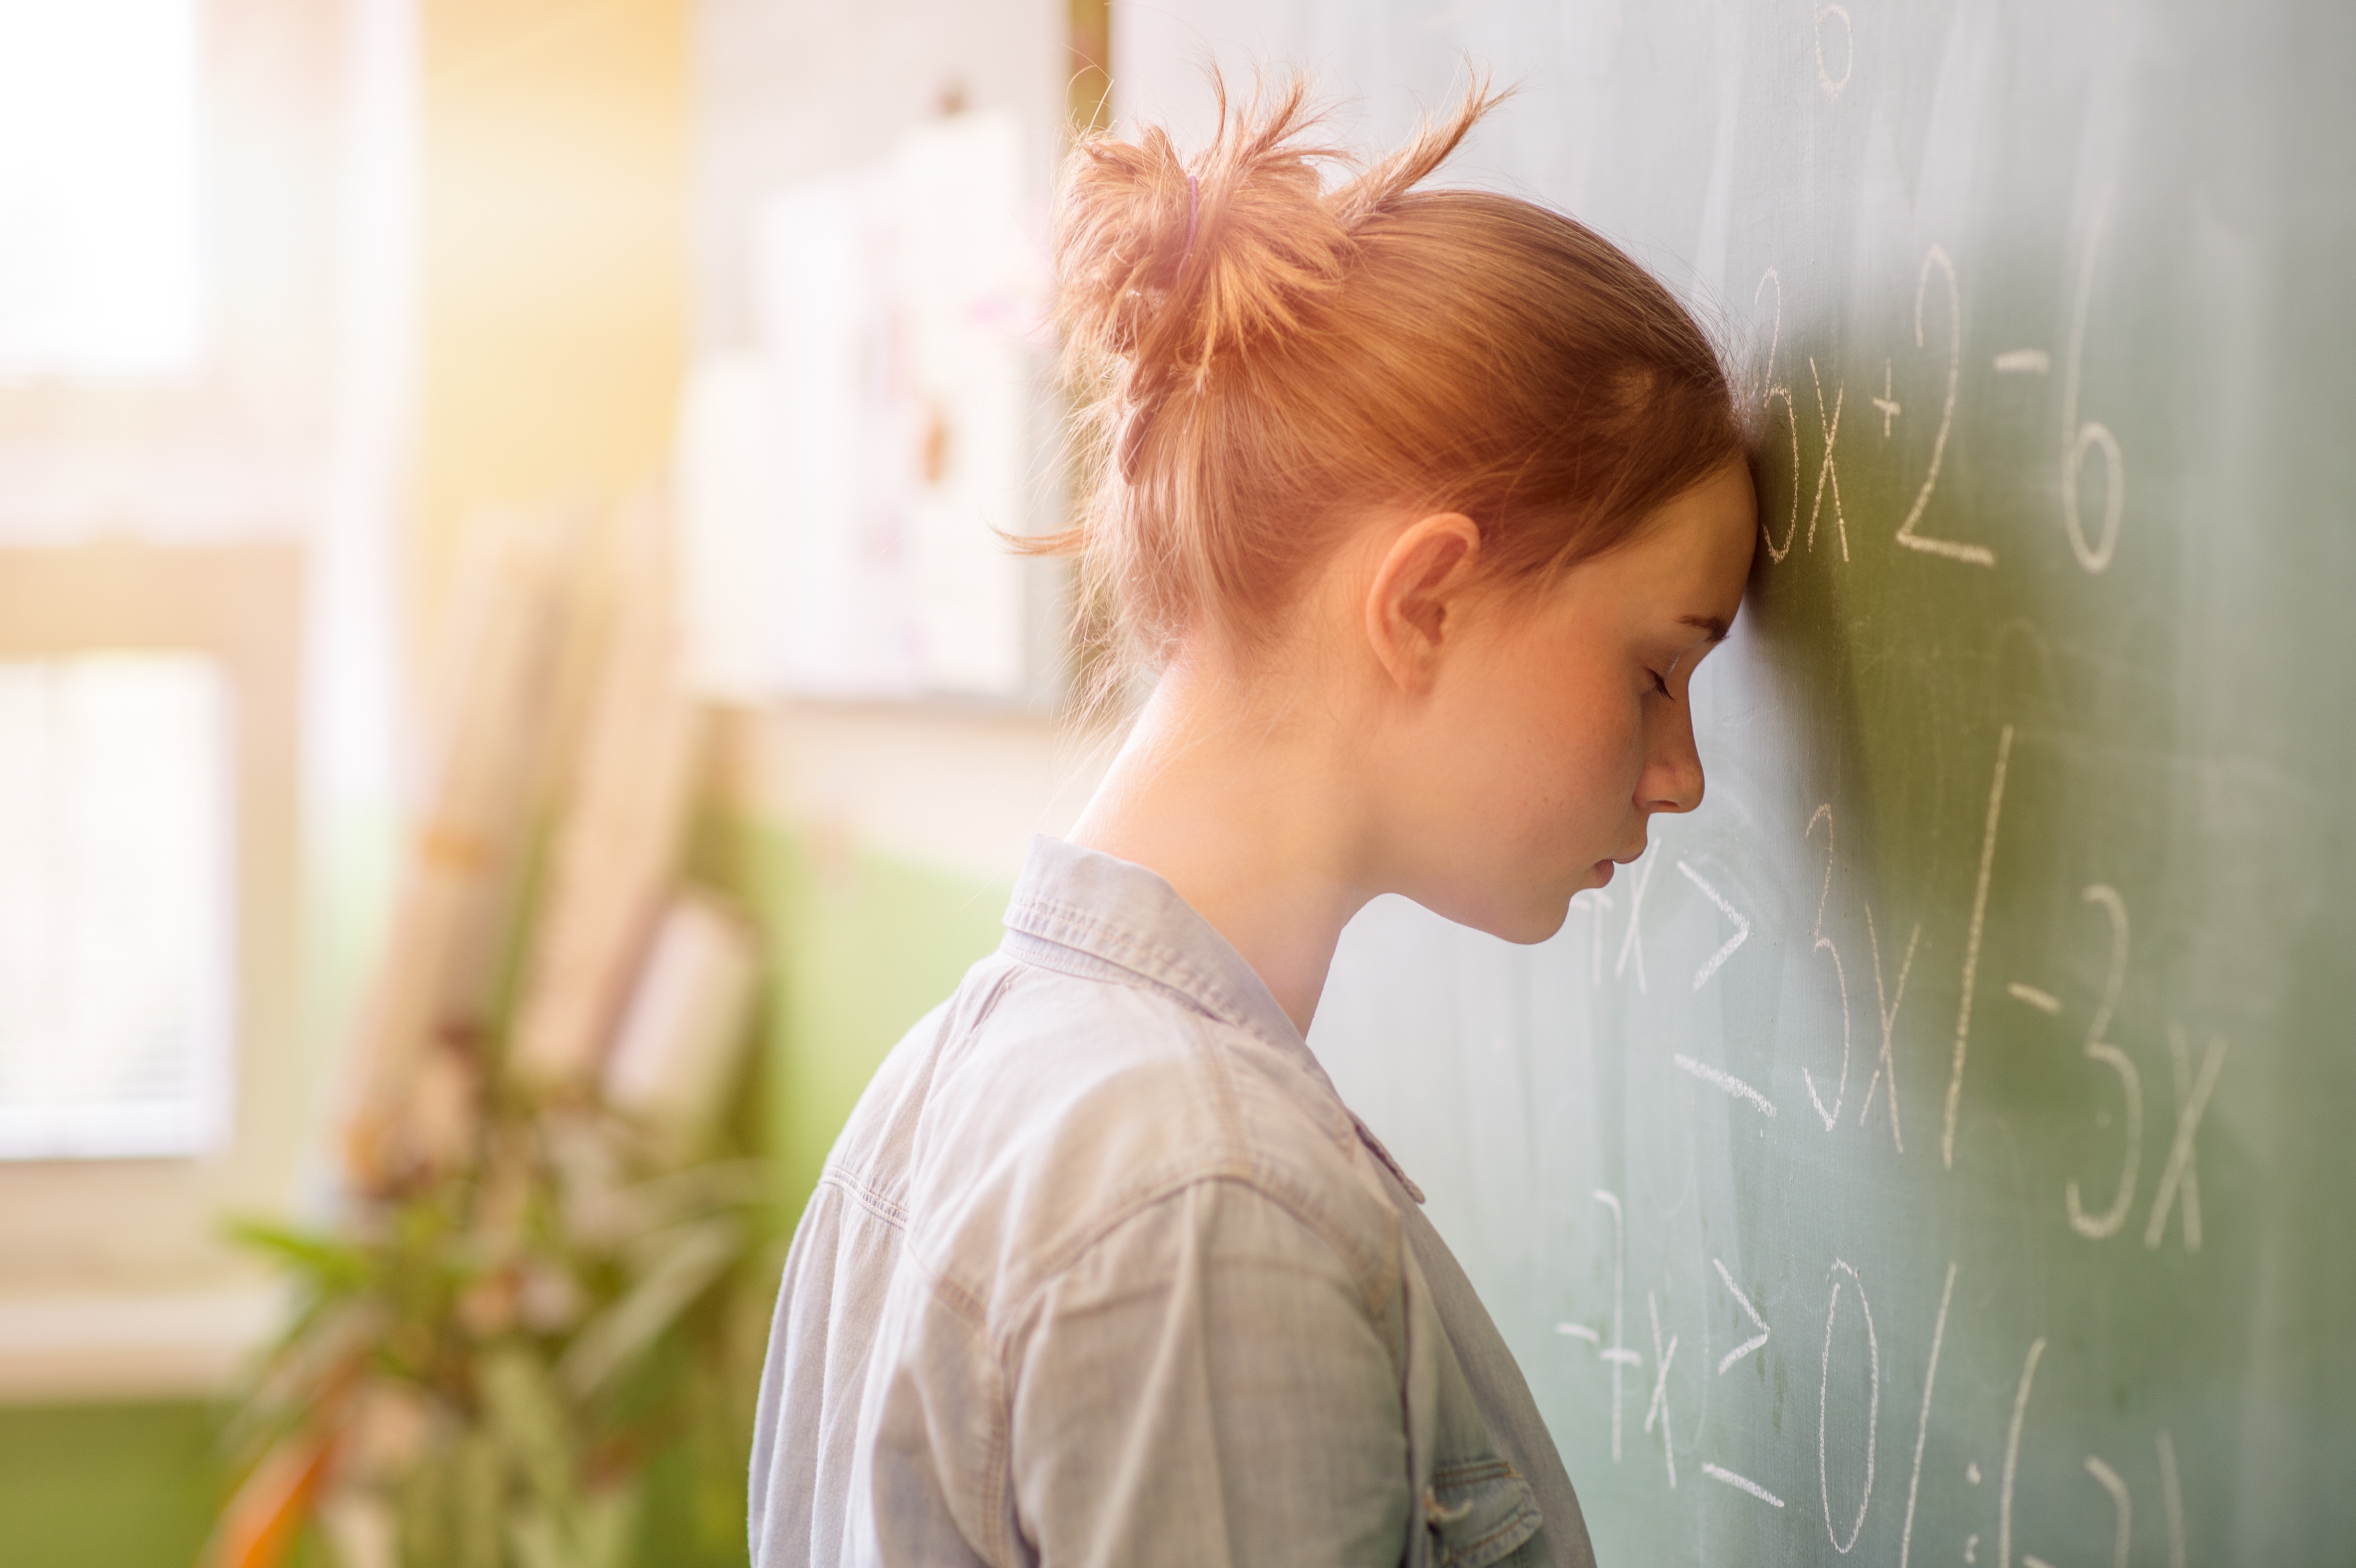 Math anxiety. Teenage girl in math class overwhelmed by the math formula.